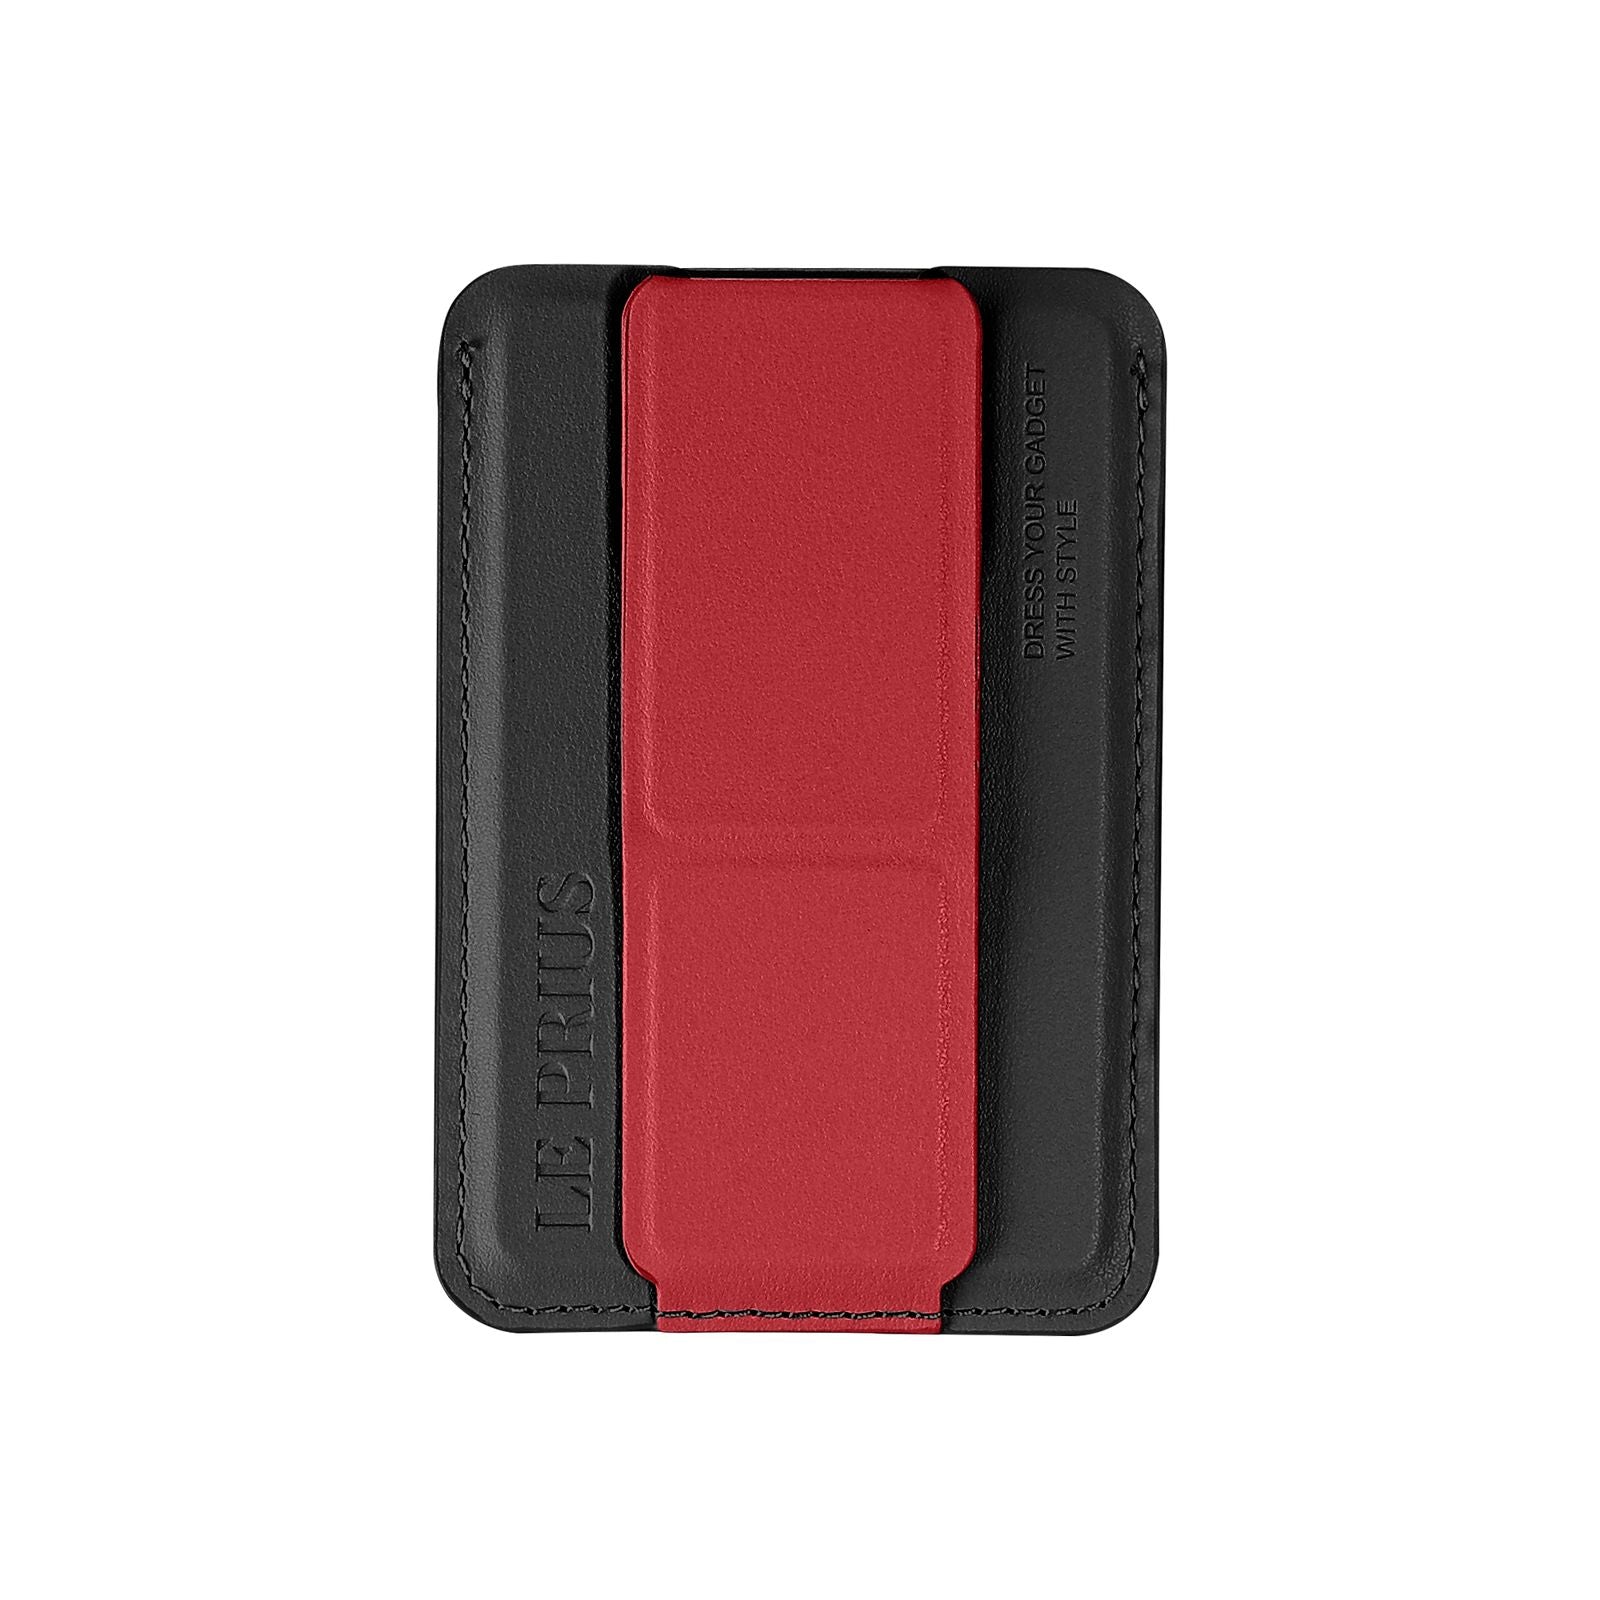 LE PRIUS Bengal Series, Magnetic Card Holder With Grip And Extendable Smart stand - Red